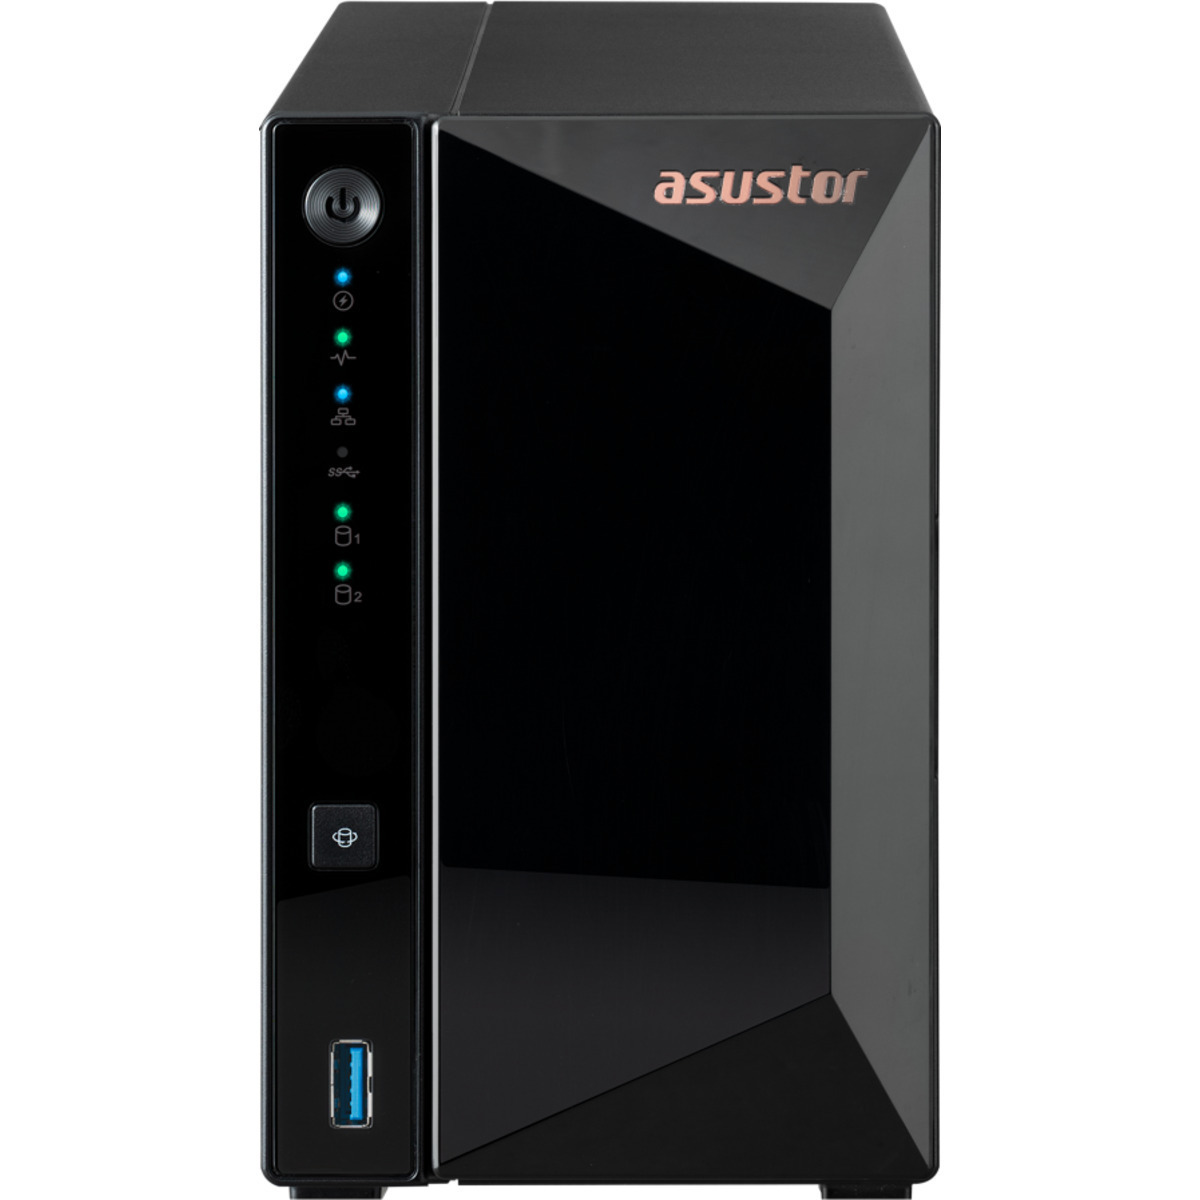 ASUSTOR DRIVESTOR 2 Pro AS3302T 16tb 2-Bay Desktop Personal / Basic Home / Small Office NAS - Network Attached Storage Device 2x8tb Seagate IronWolf Pro ST8000NT001 3.5 7200rpm SATA 6Gb/s HDD NAS Class Drives Installed - Burn-In Tested - ON SALE DRIVESTOR 2 Pro AS3302T